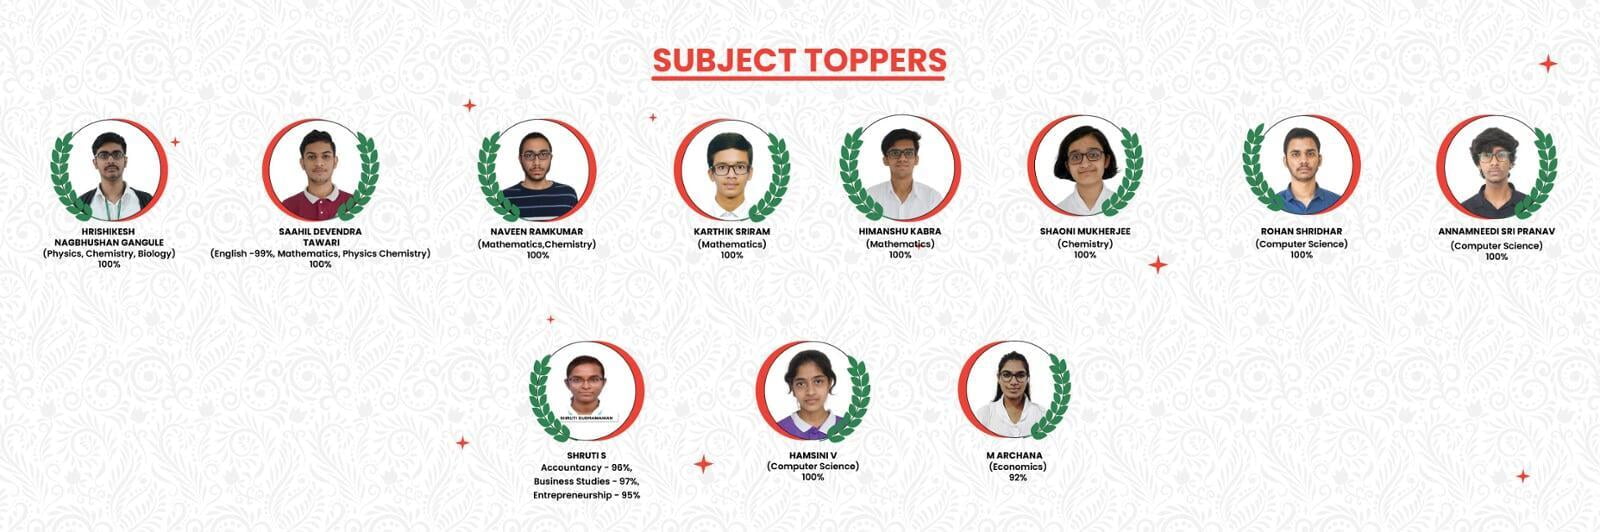 National Centre for Excellence - CBSE Grade 12 Toppers